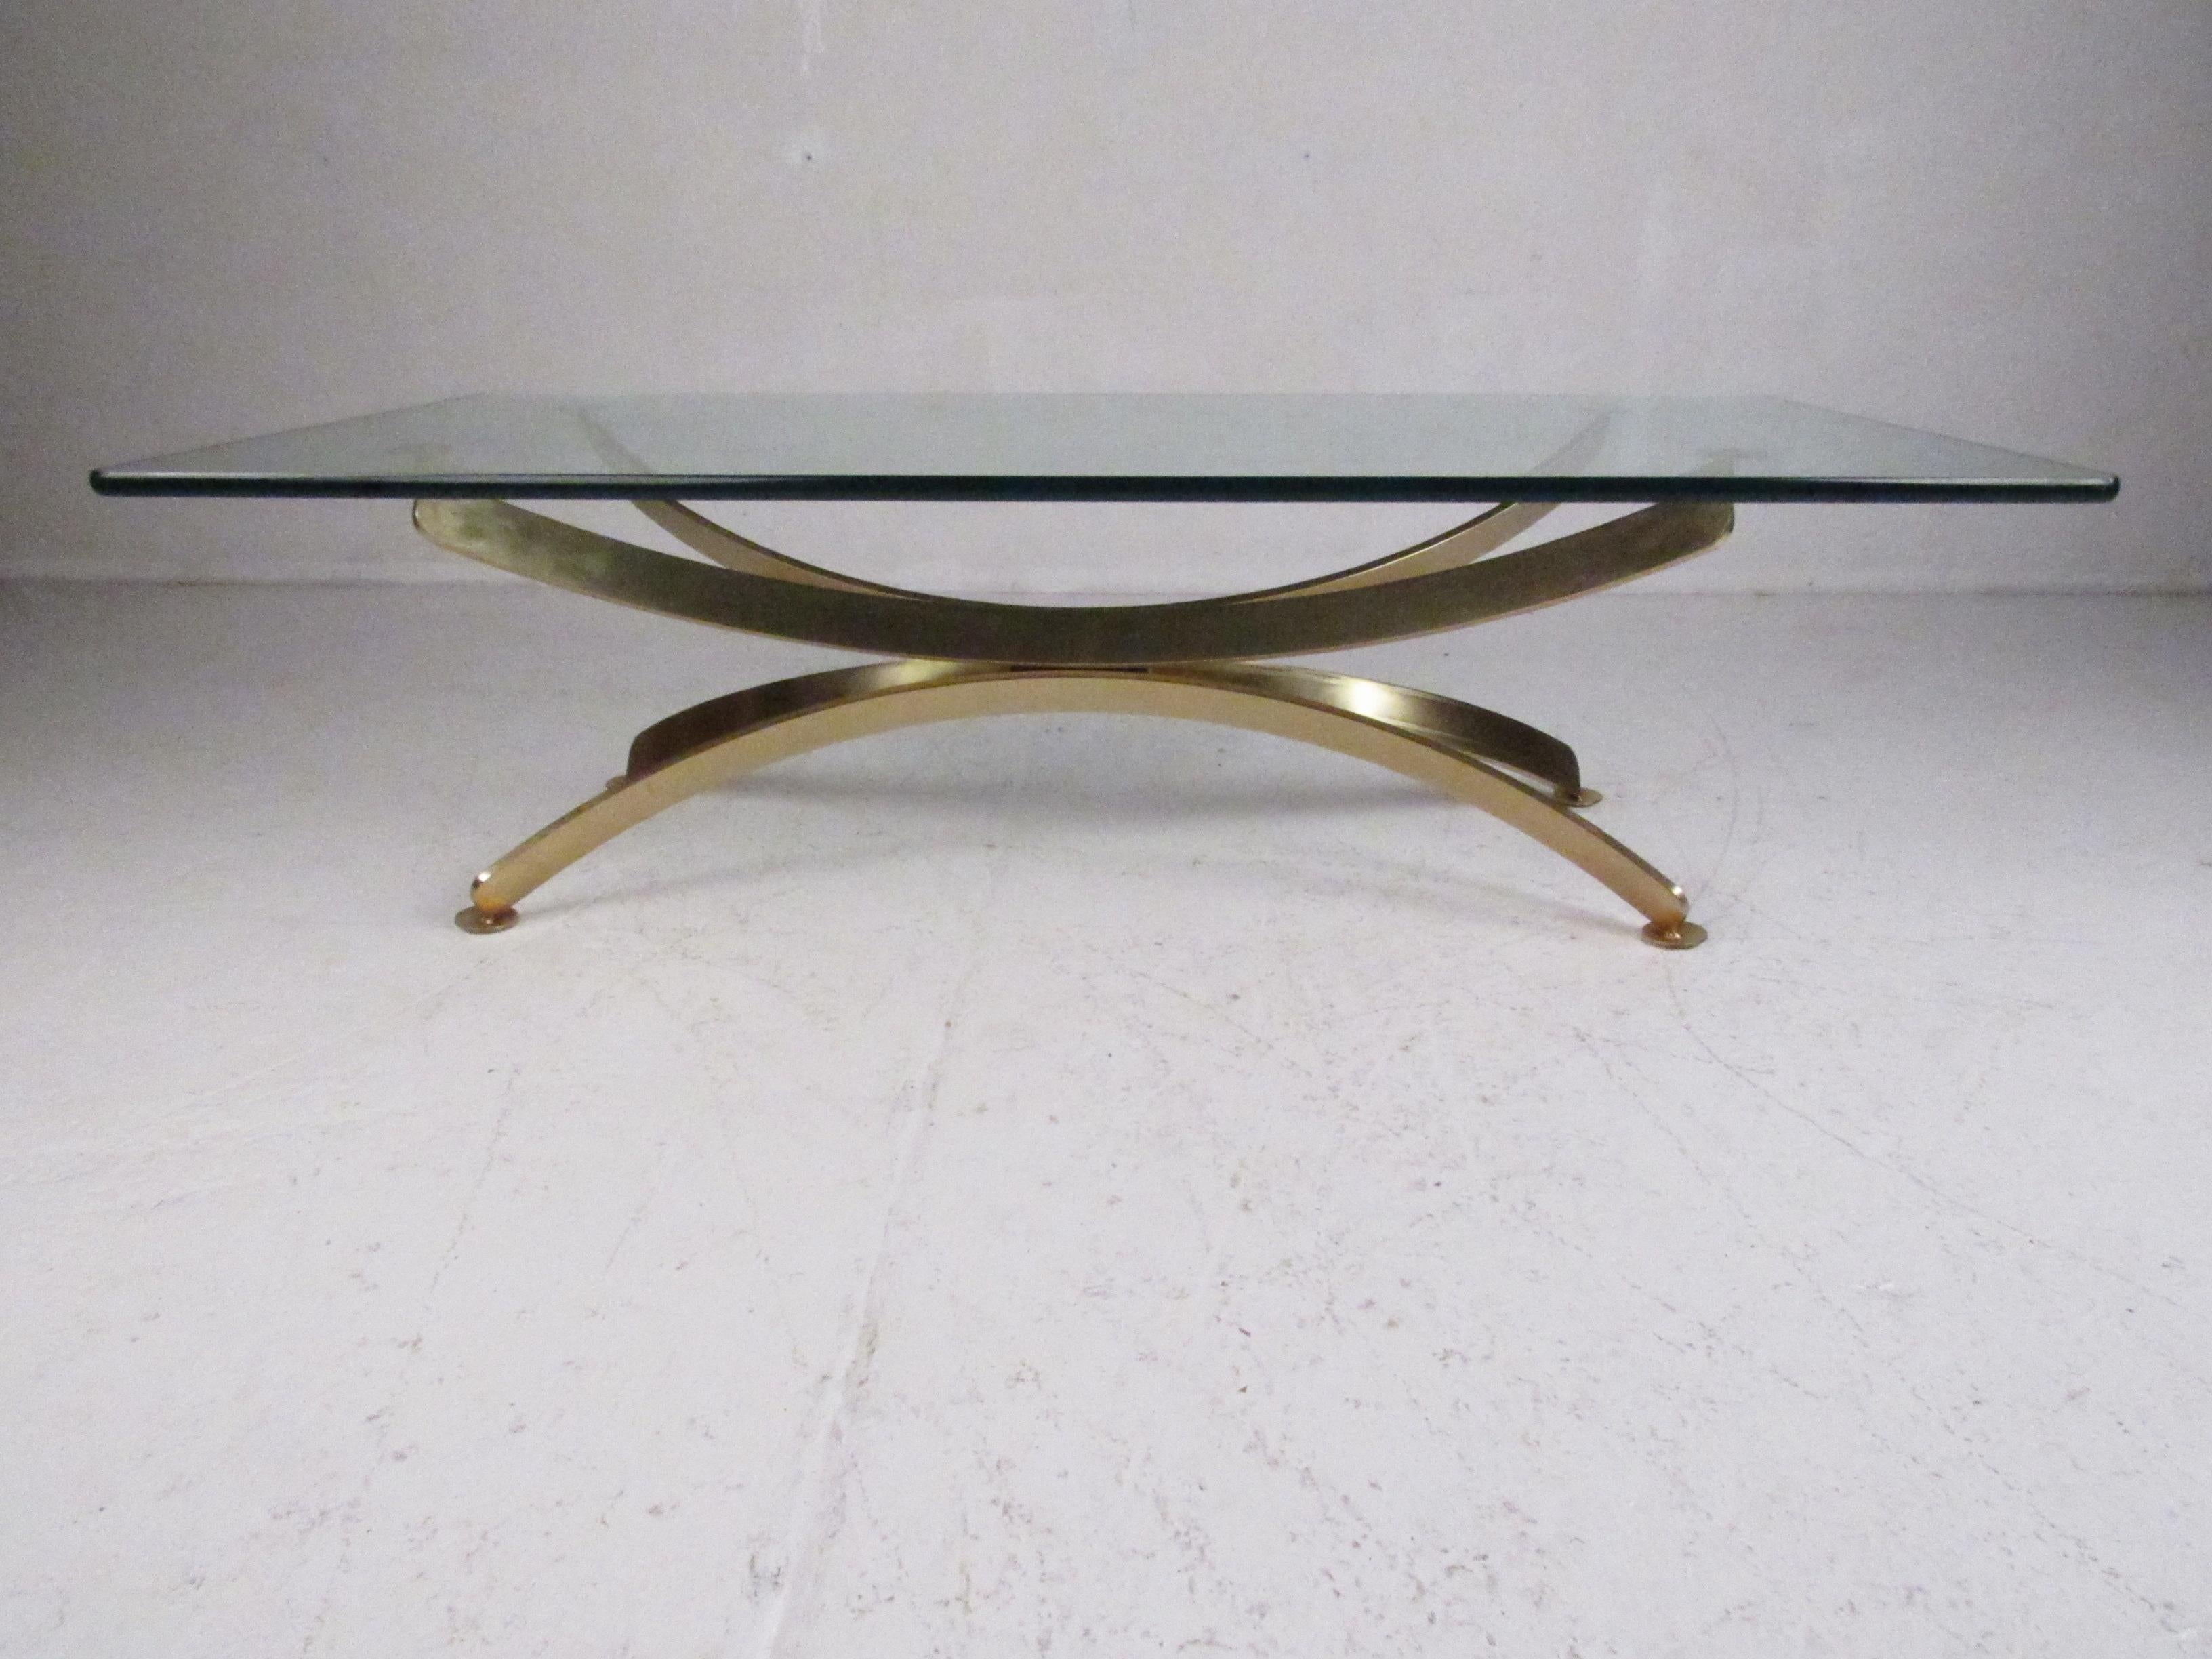 An elegant vintage modern coffee table with an extremely heavy brass base. This unique table features a bent flat bar base and a massive rectangular glass top. A sleek design that is sure to make a lasting impression in any home, business, or